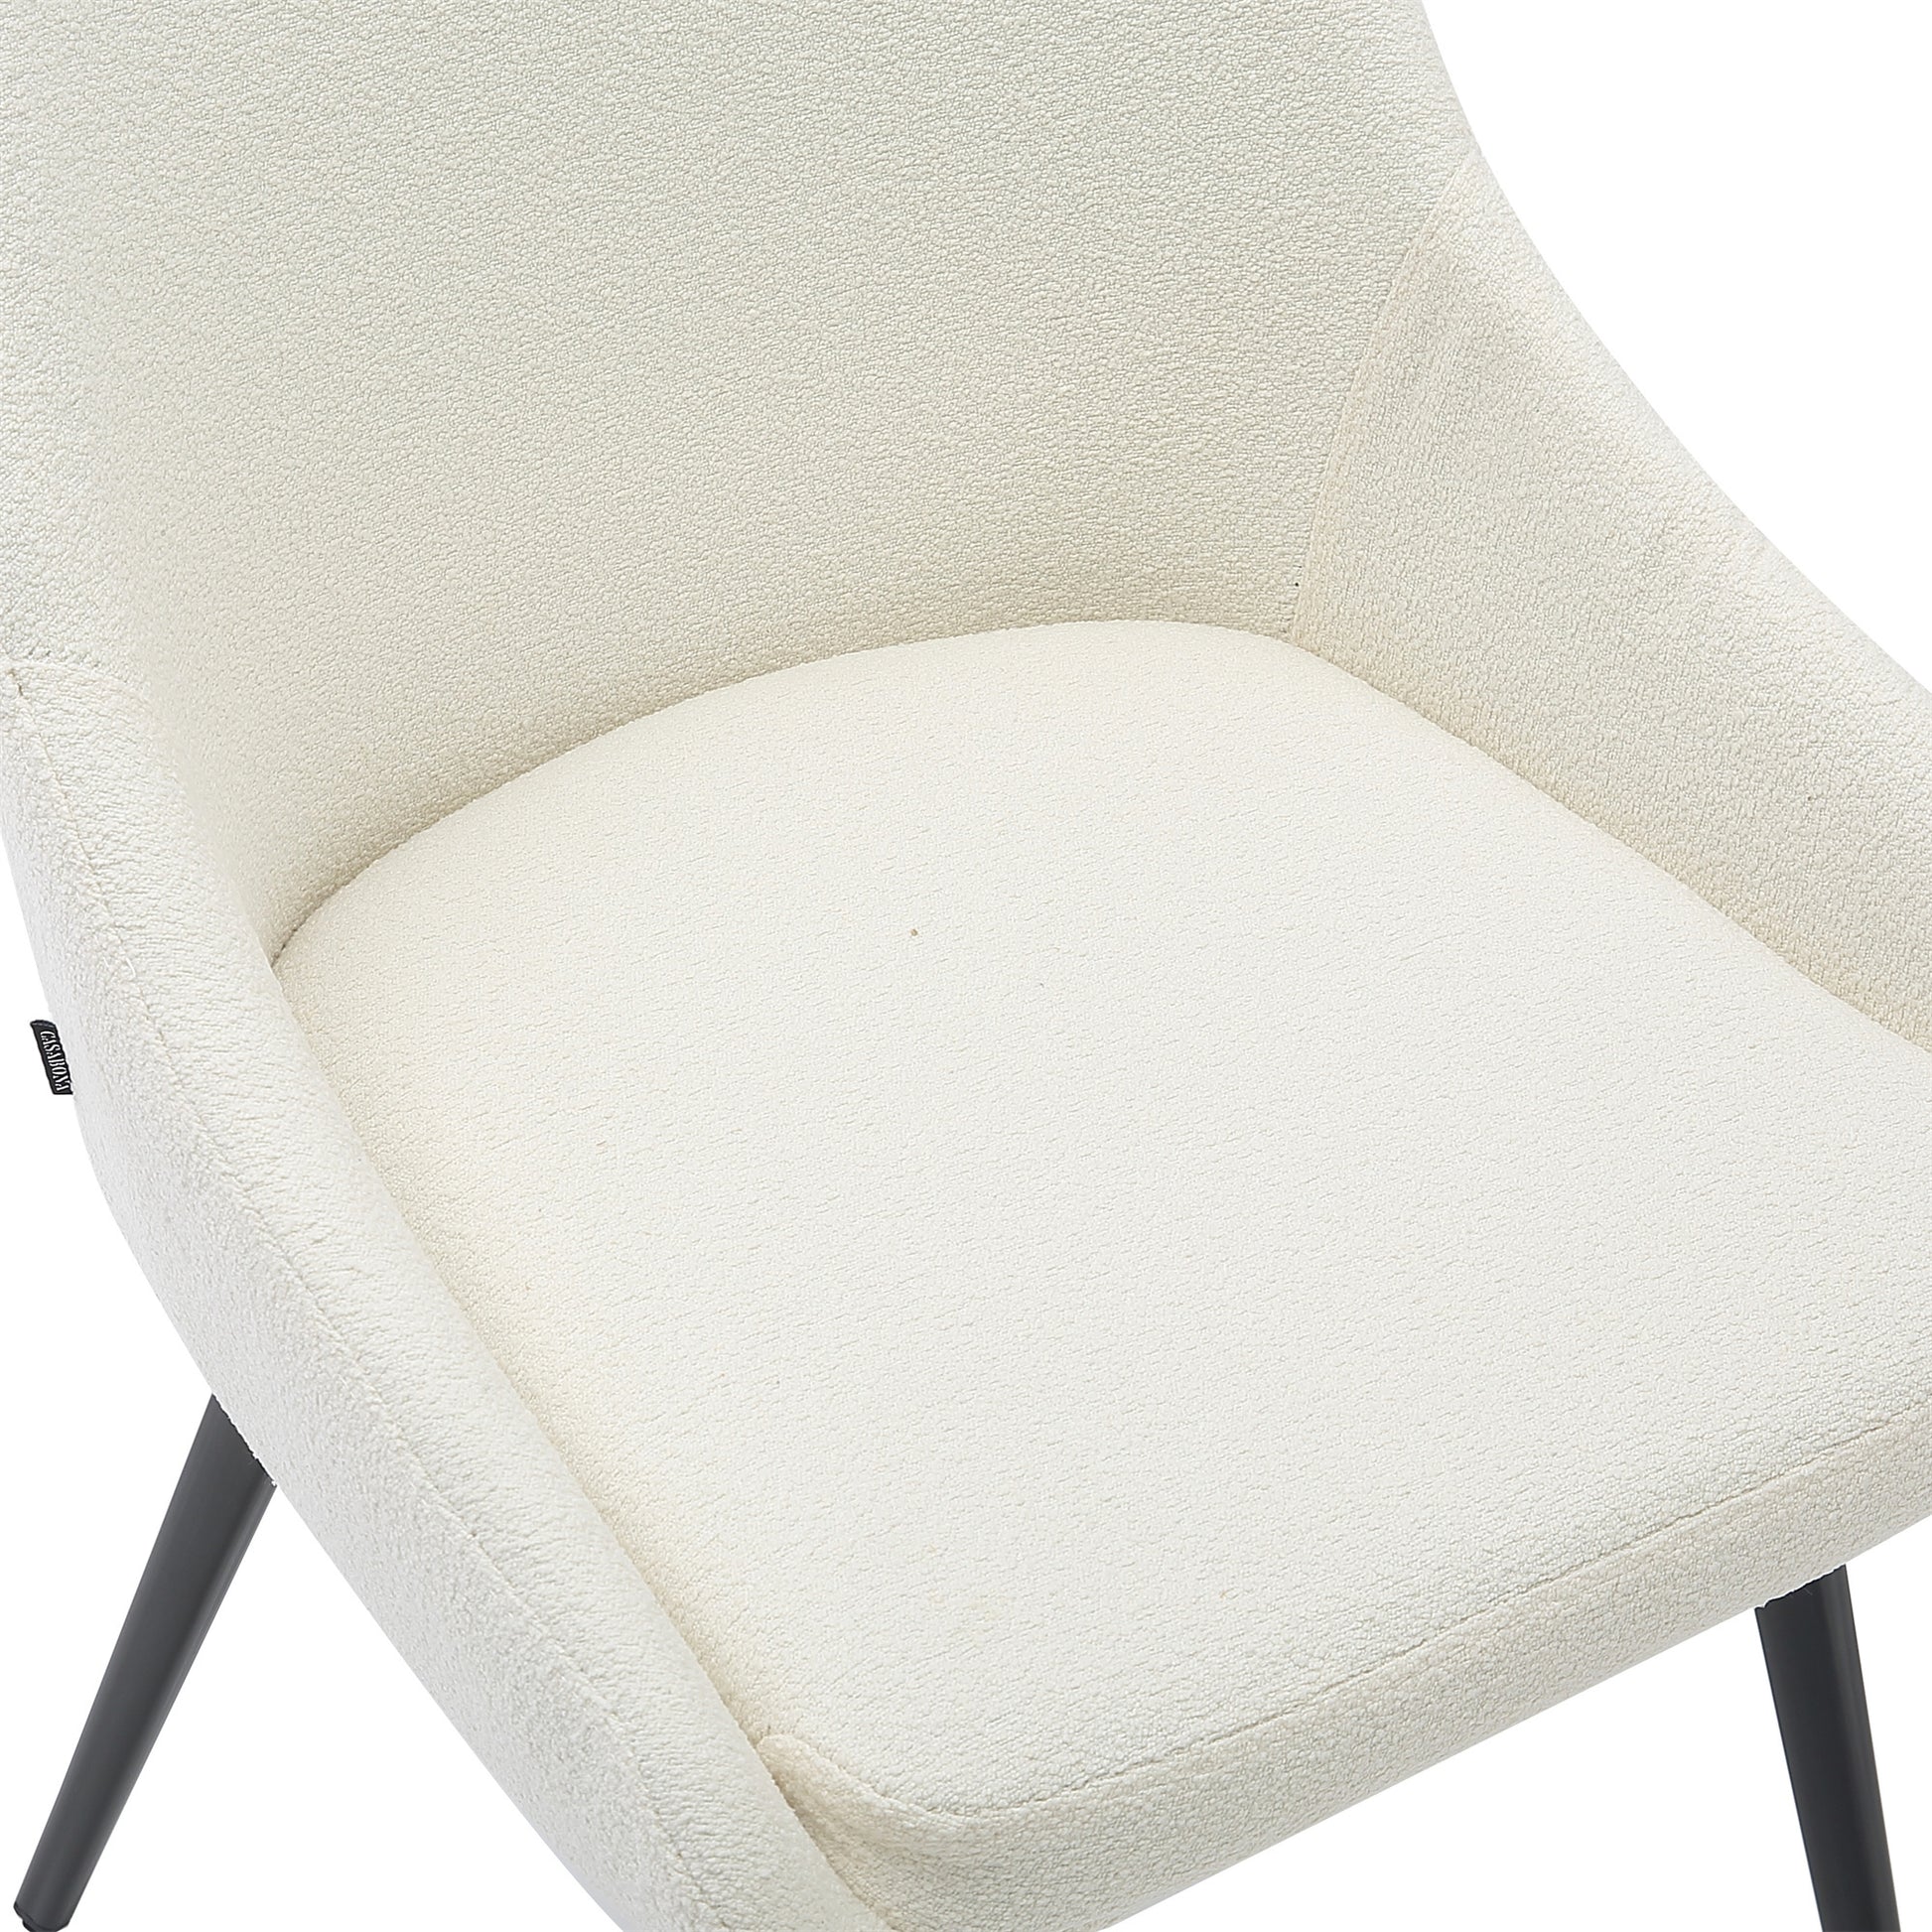 Chesterton | Commercial Stain Resistant Waterproof Fabric Dining Chairs | Set Of 2 | Cream